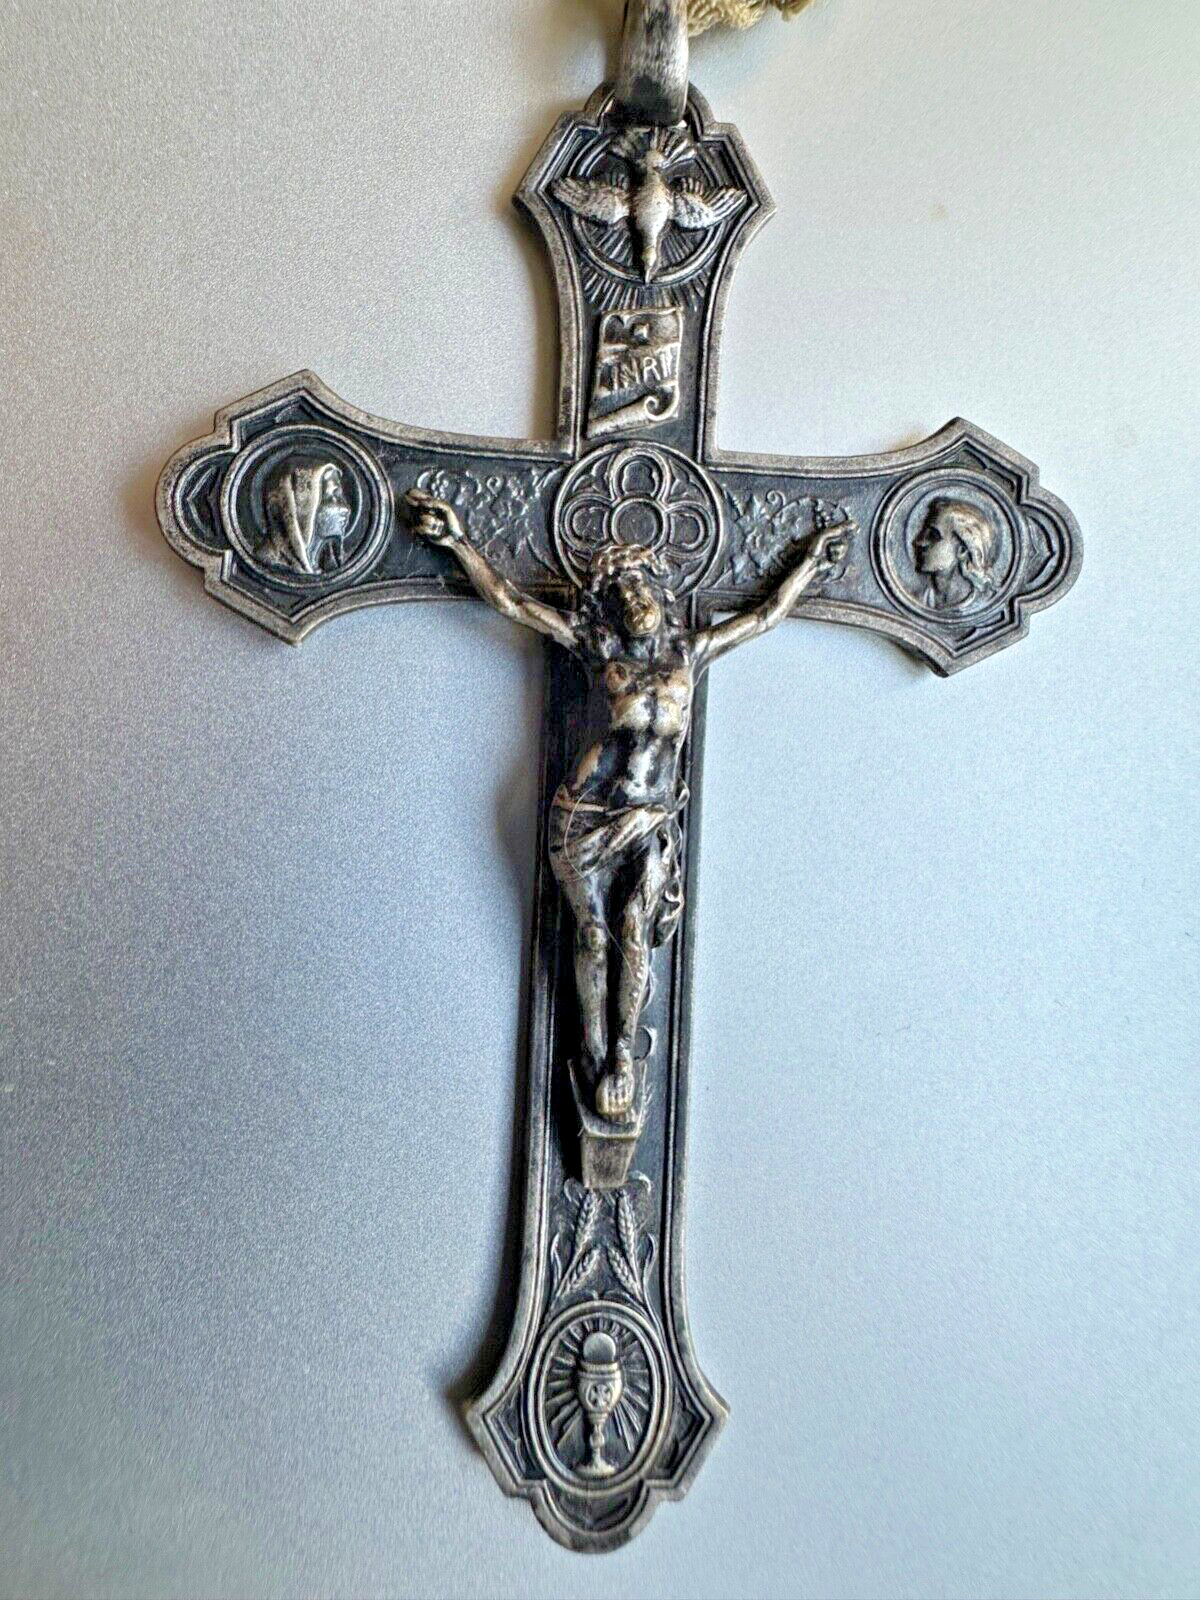 Superb Antique  Religious Silver Cross engraved with multiple ornaments 3 1/4